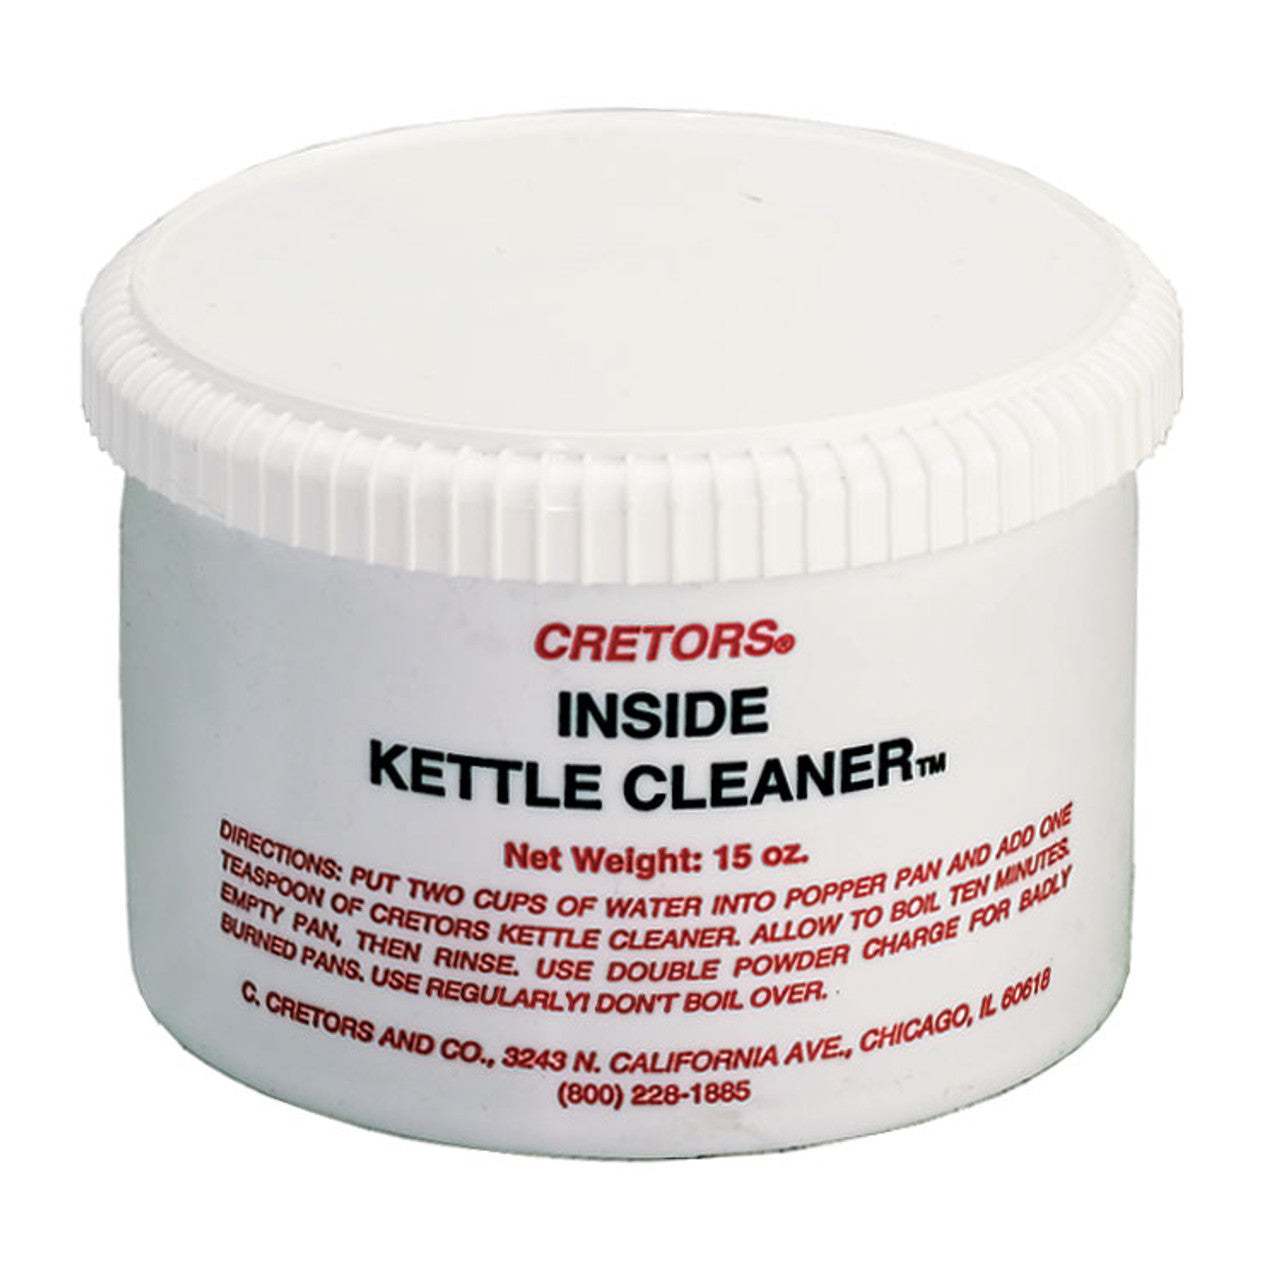 Cretors Original Inside Kettle Cleaner 15 oz. per jar. It can effectively remove built-up carbon and other debris in the kettle of your popcorn machine when mixed with water.